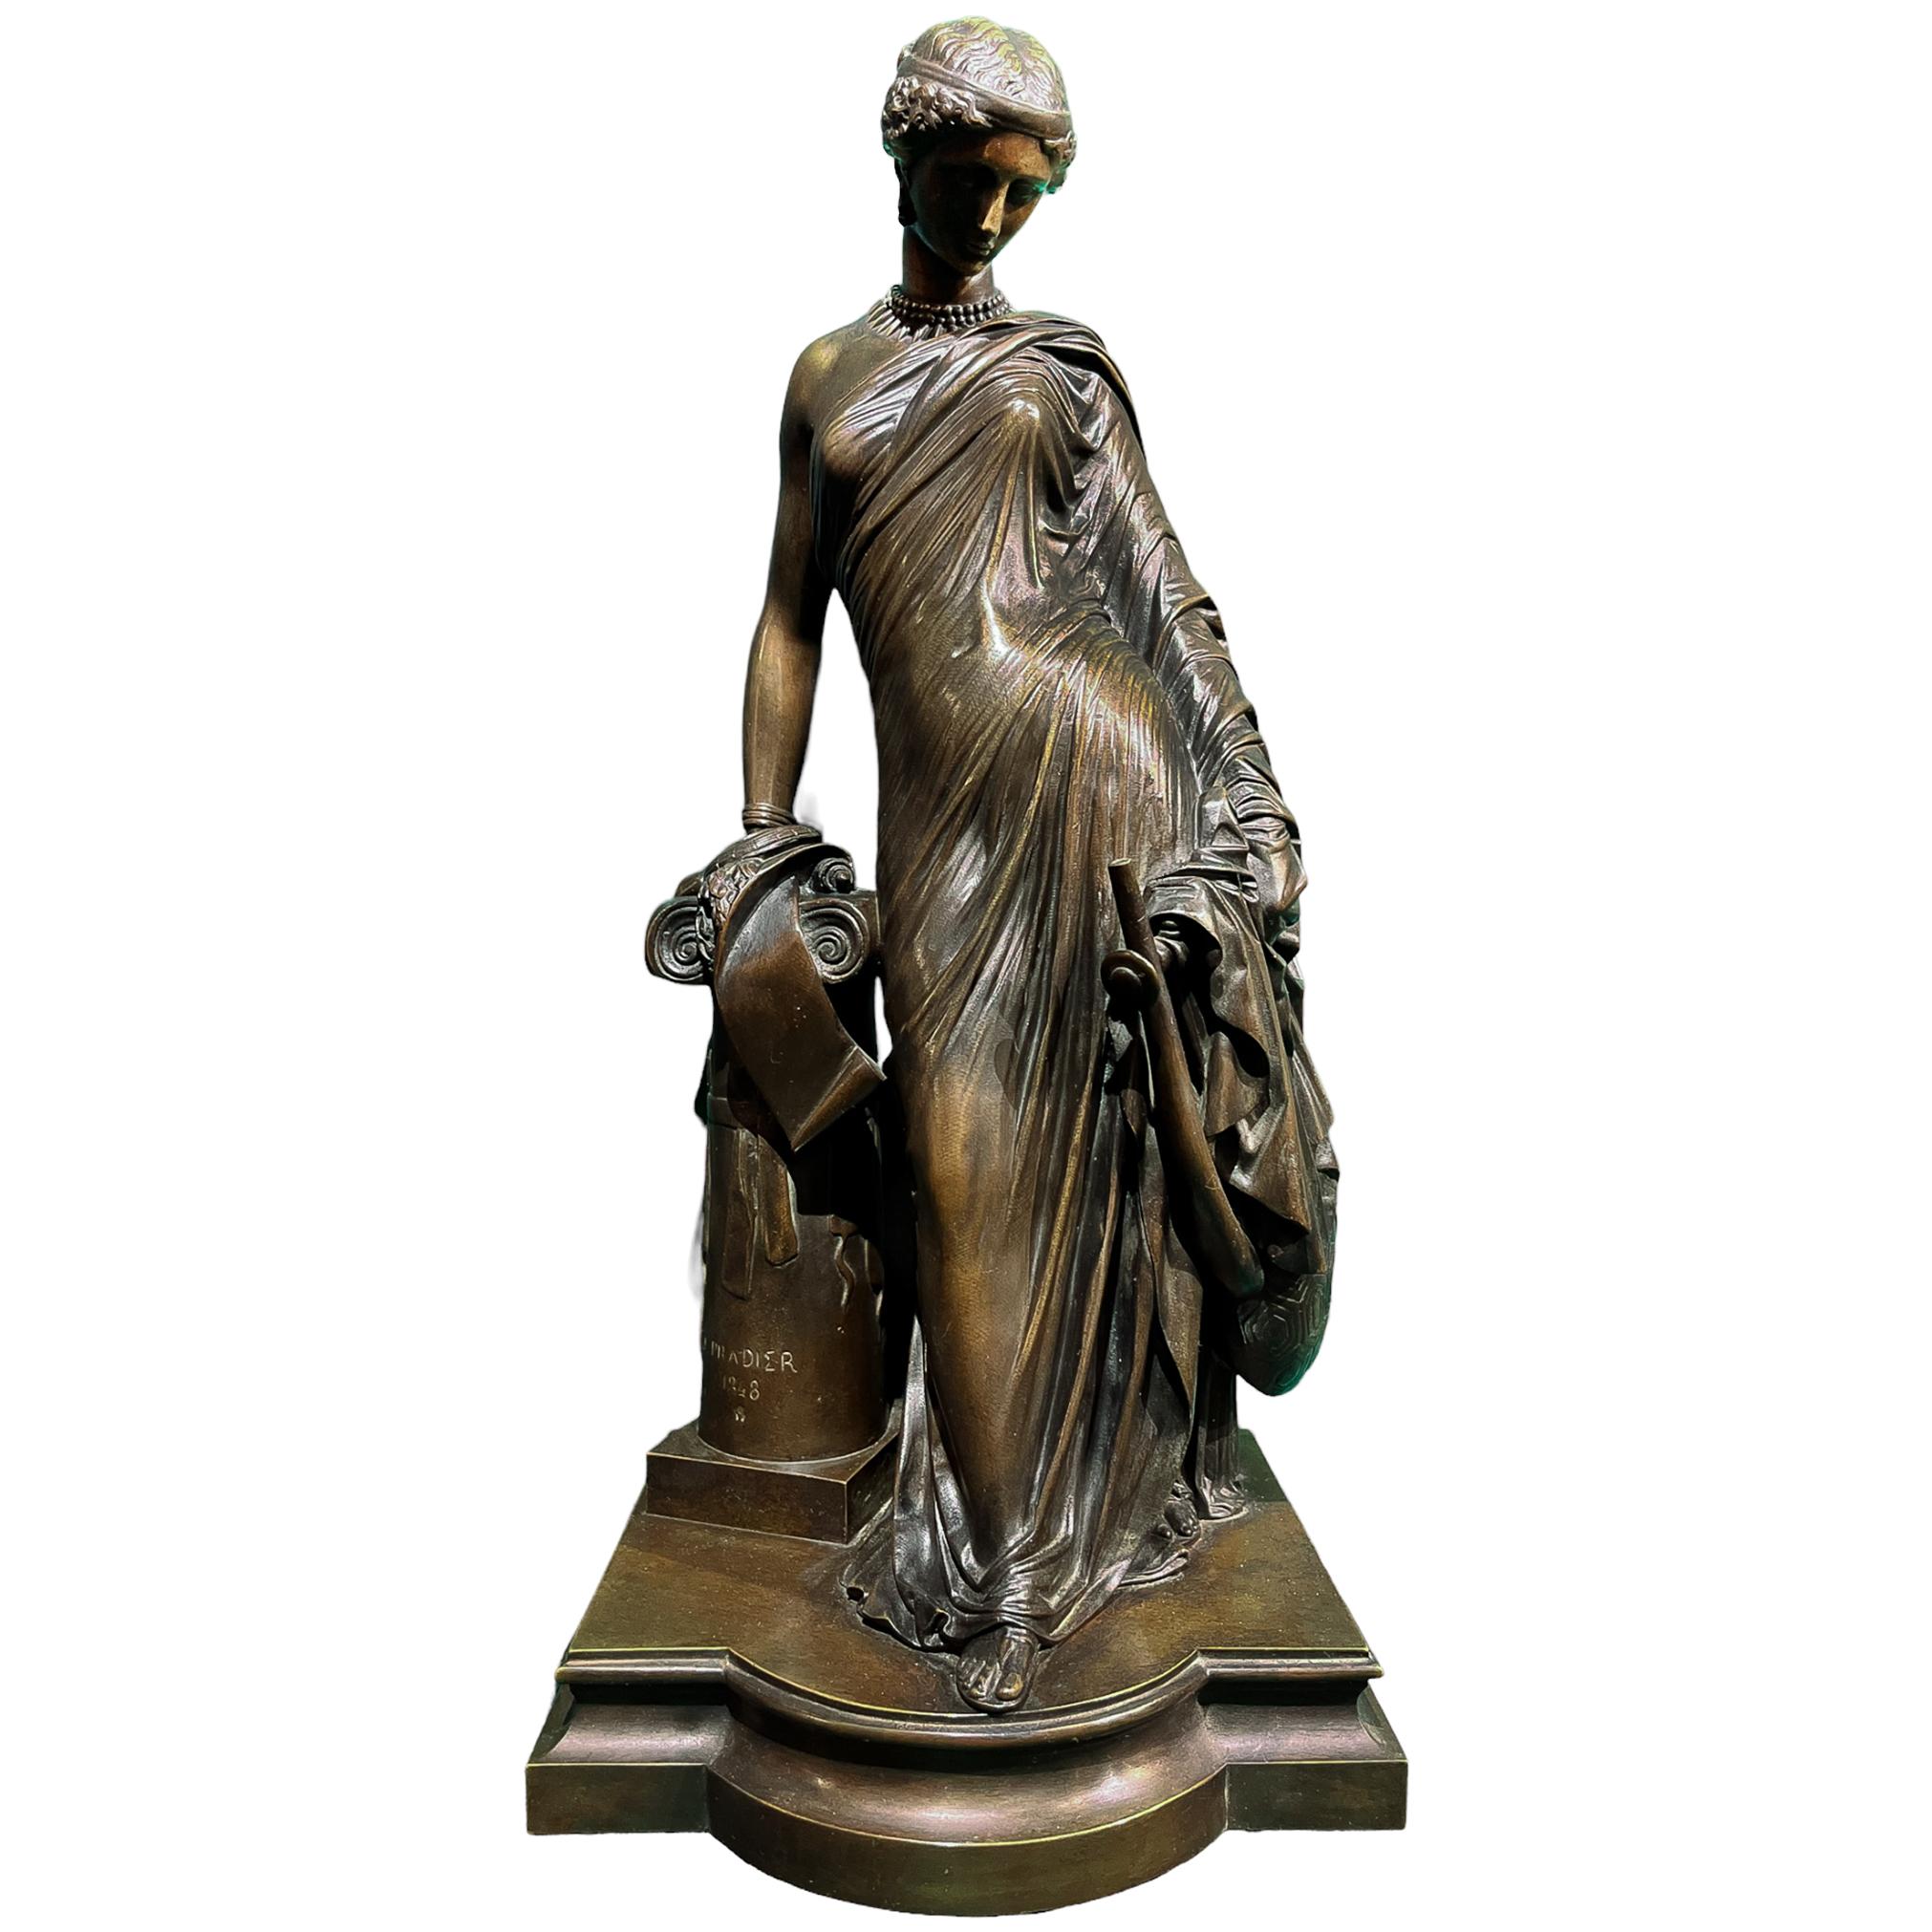 James Pradier  Figurative Sculpture - Sappho Leaning Against a Column Holding Her Lyre by Pradier in French Bronze